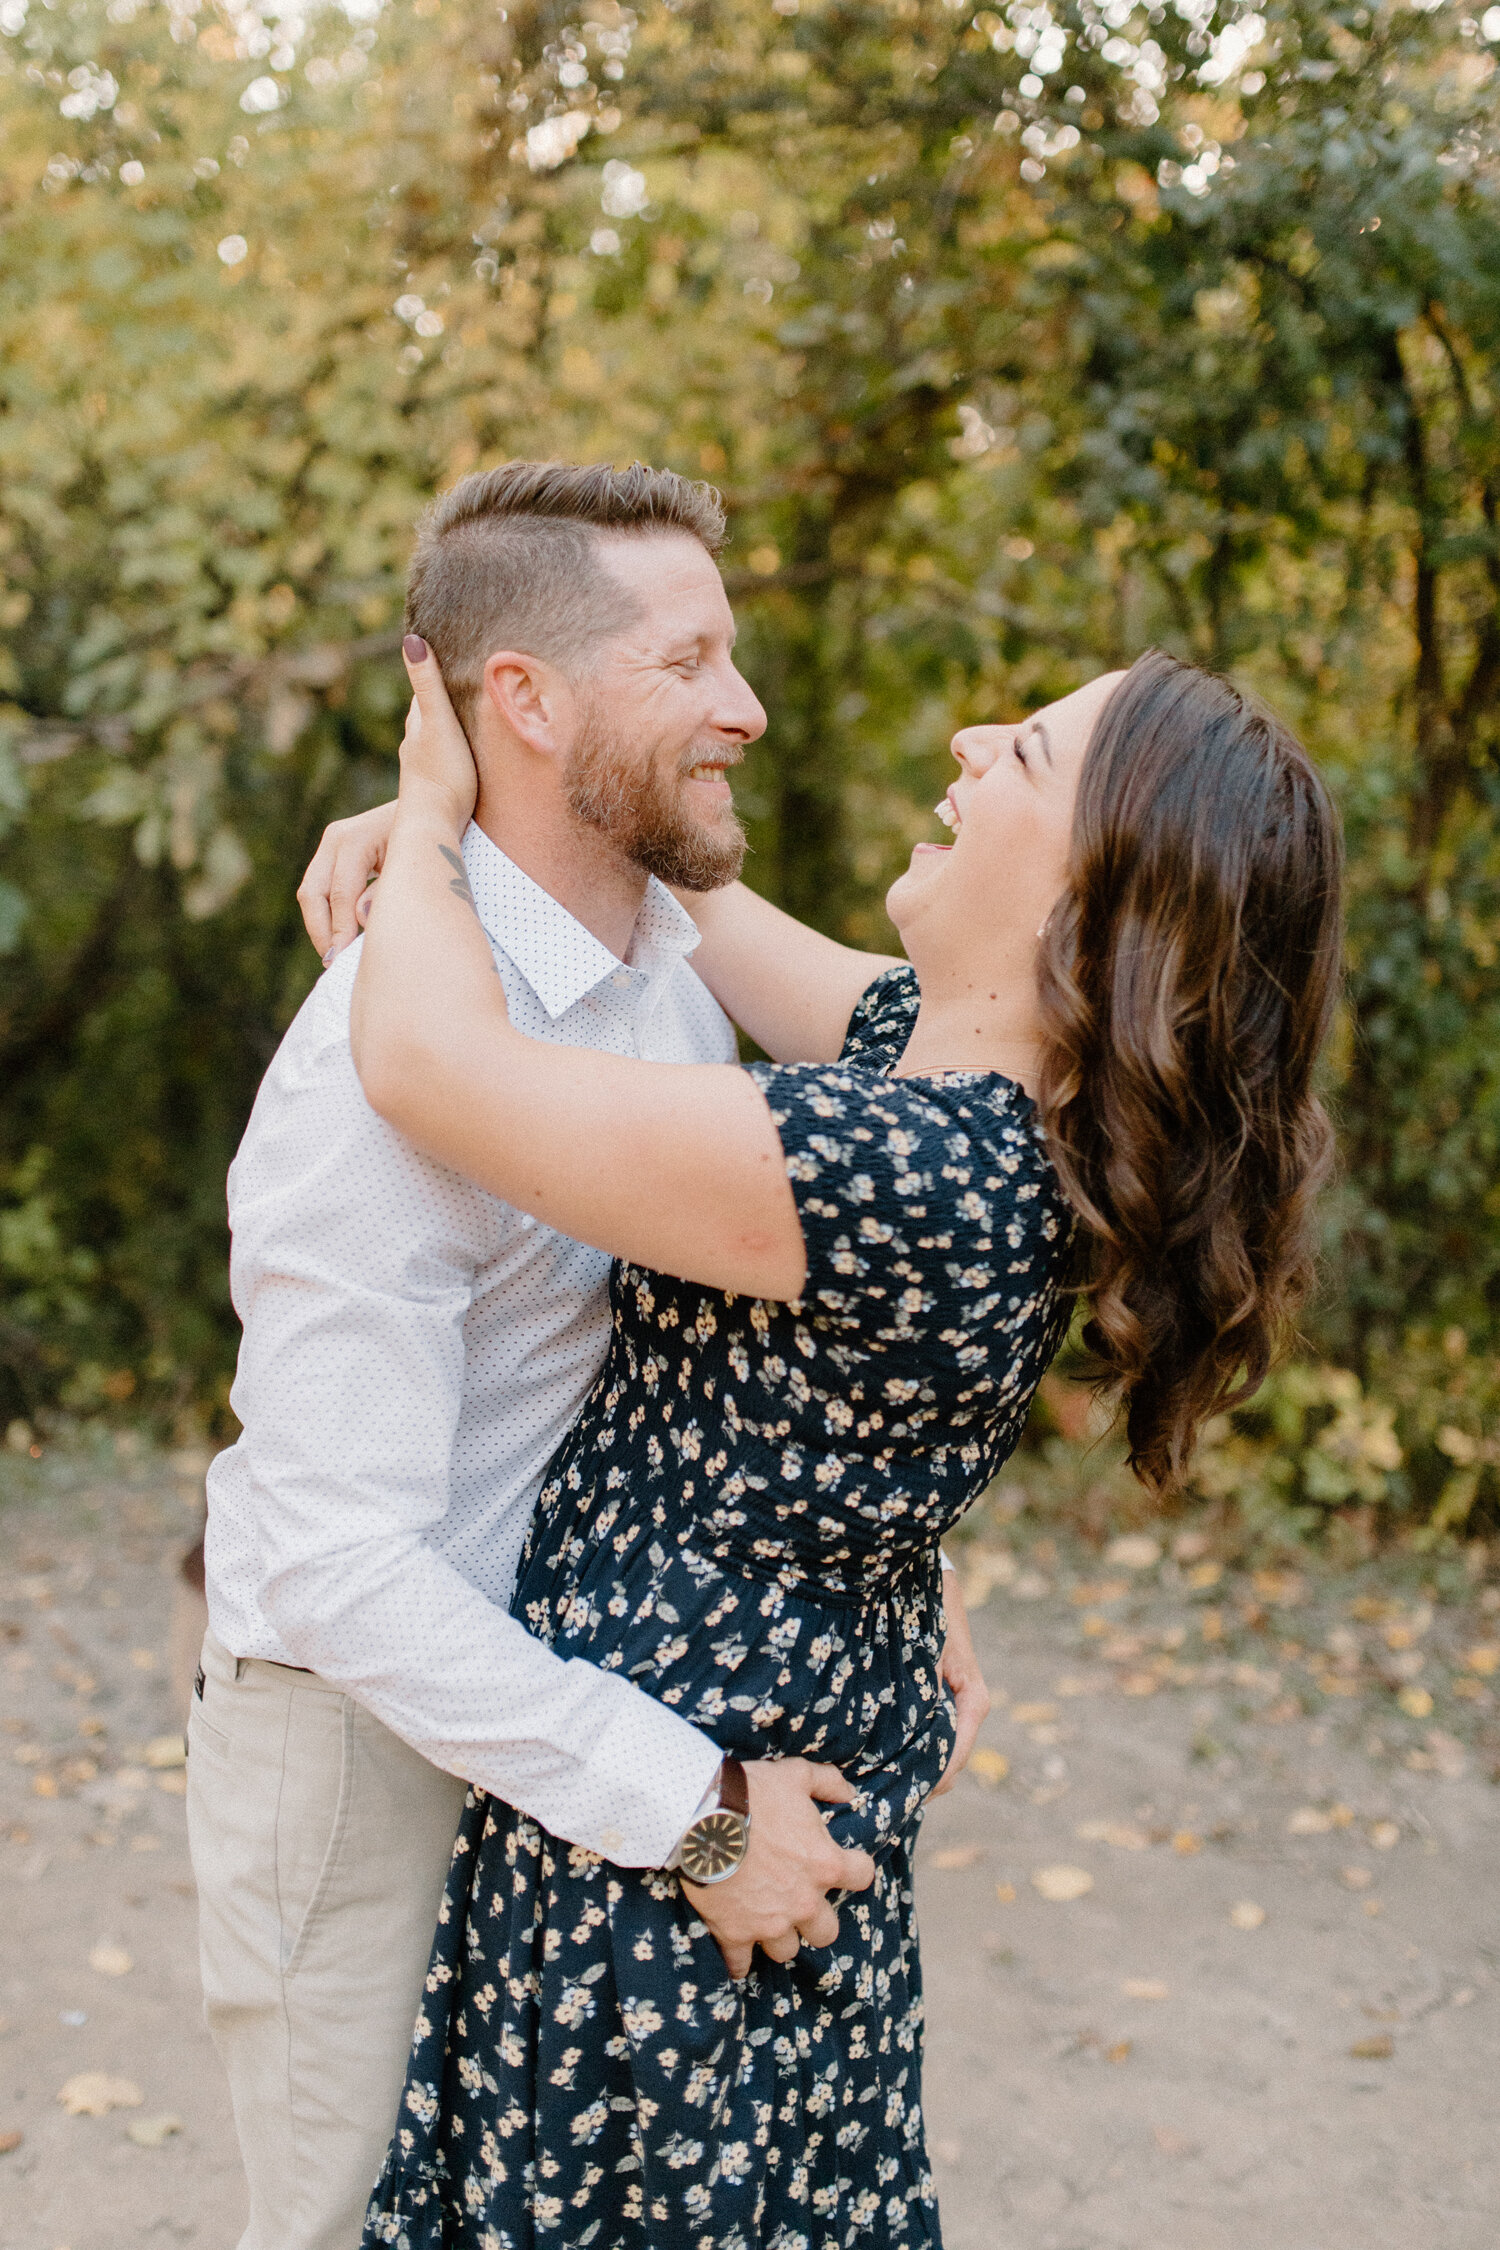  During this camping engagement session in Ontario, Canada, Chelsea Mason Photography captures this playful couple hugging and laughing. Laughing playful engagement session, ontario canada engagement photographer, formal engagement outfit inspiration